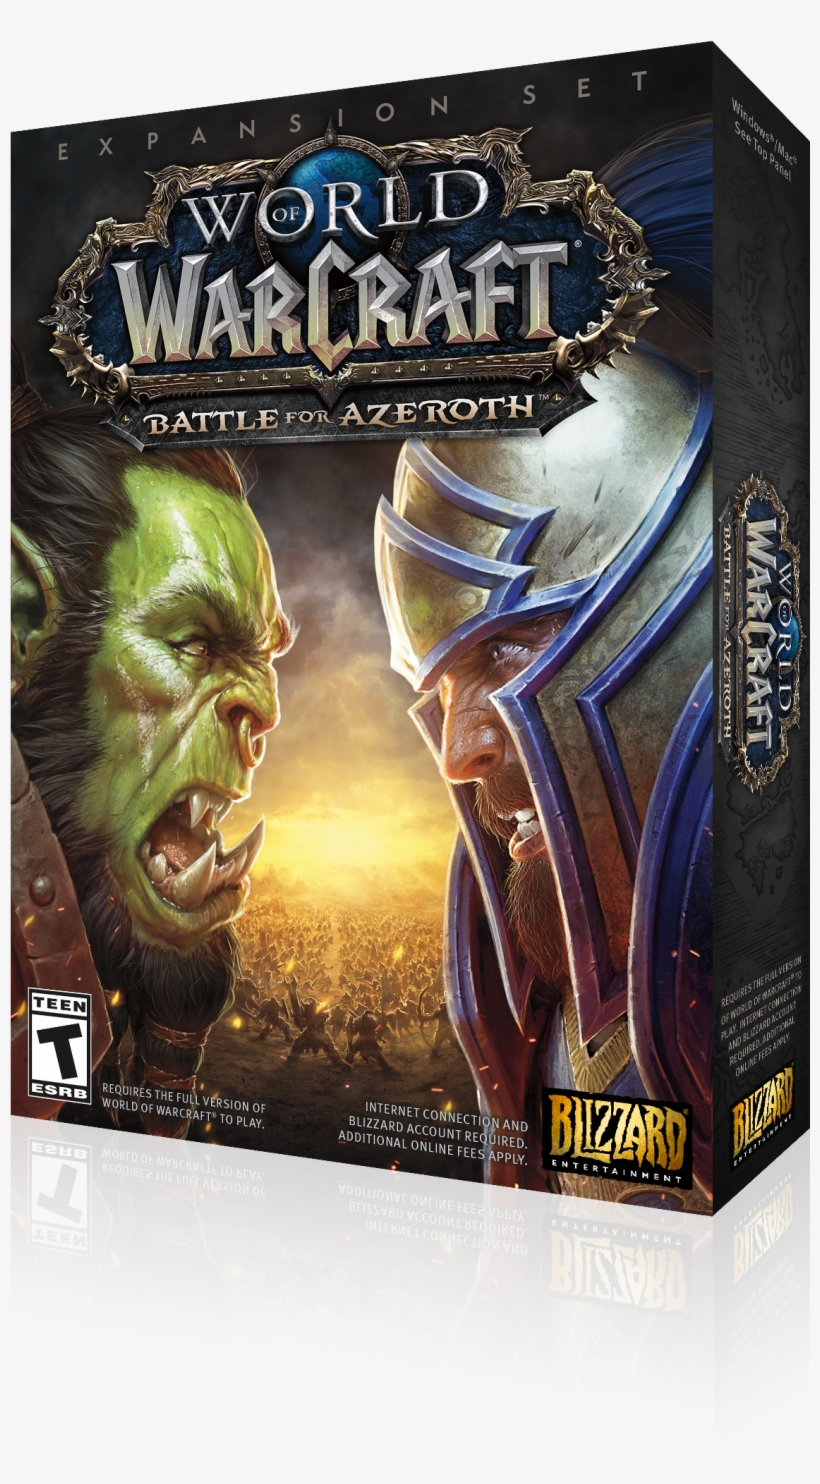 Wow Battleforazeroth 3d-right - Battle For Azeroth Price, transparent png #4969614